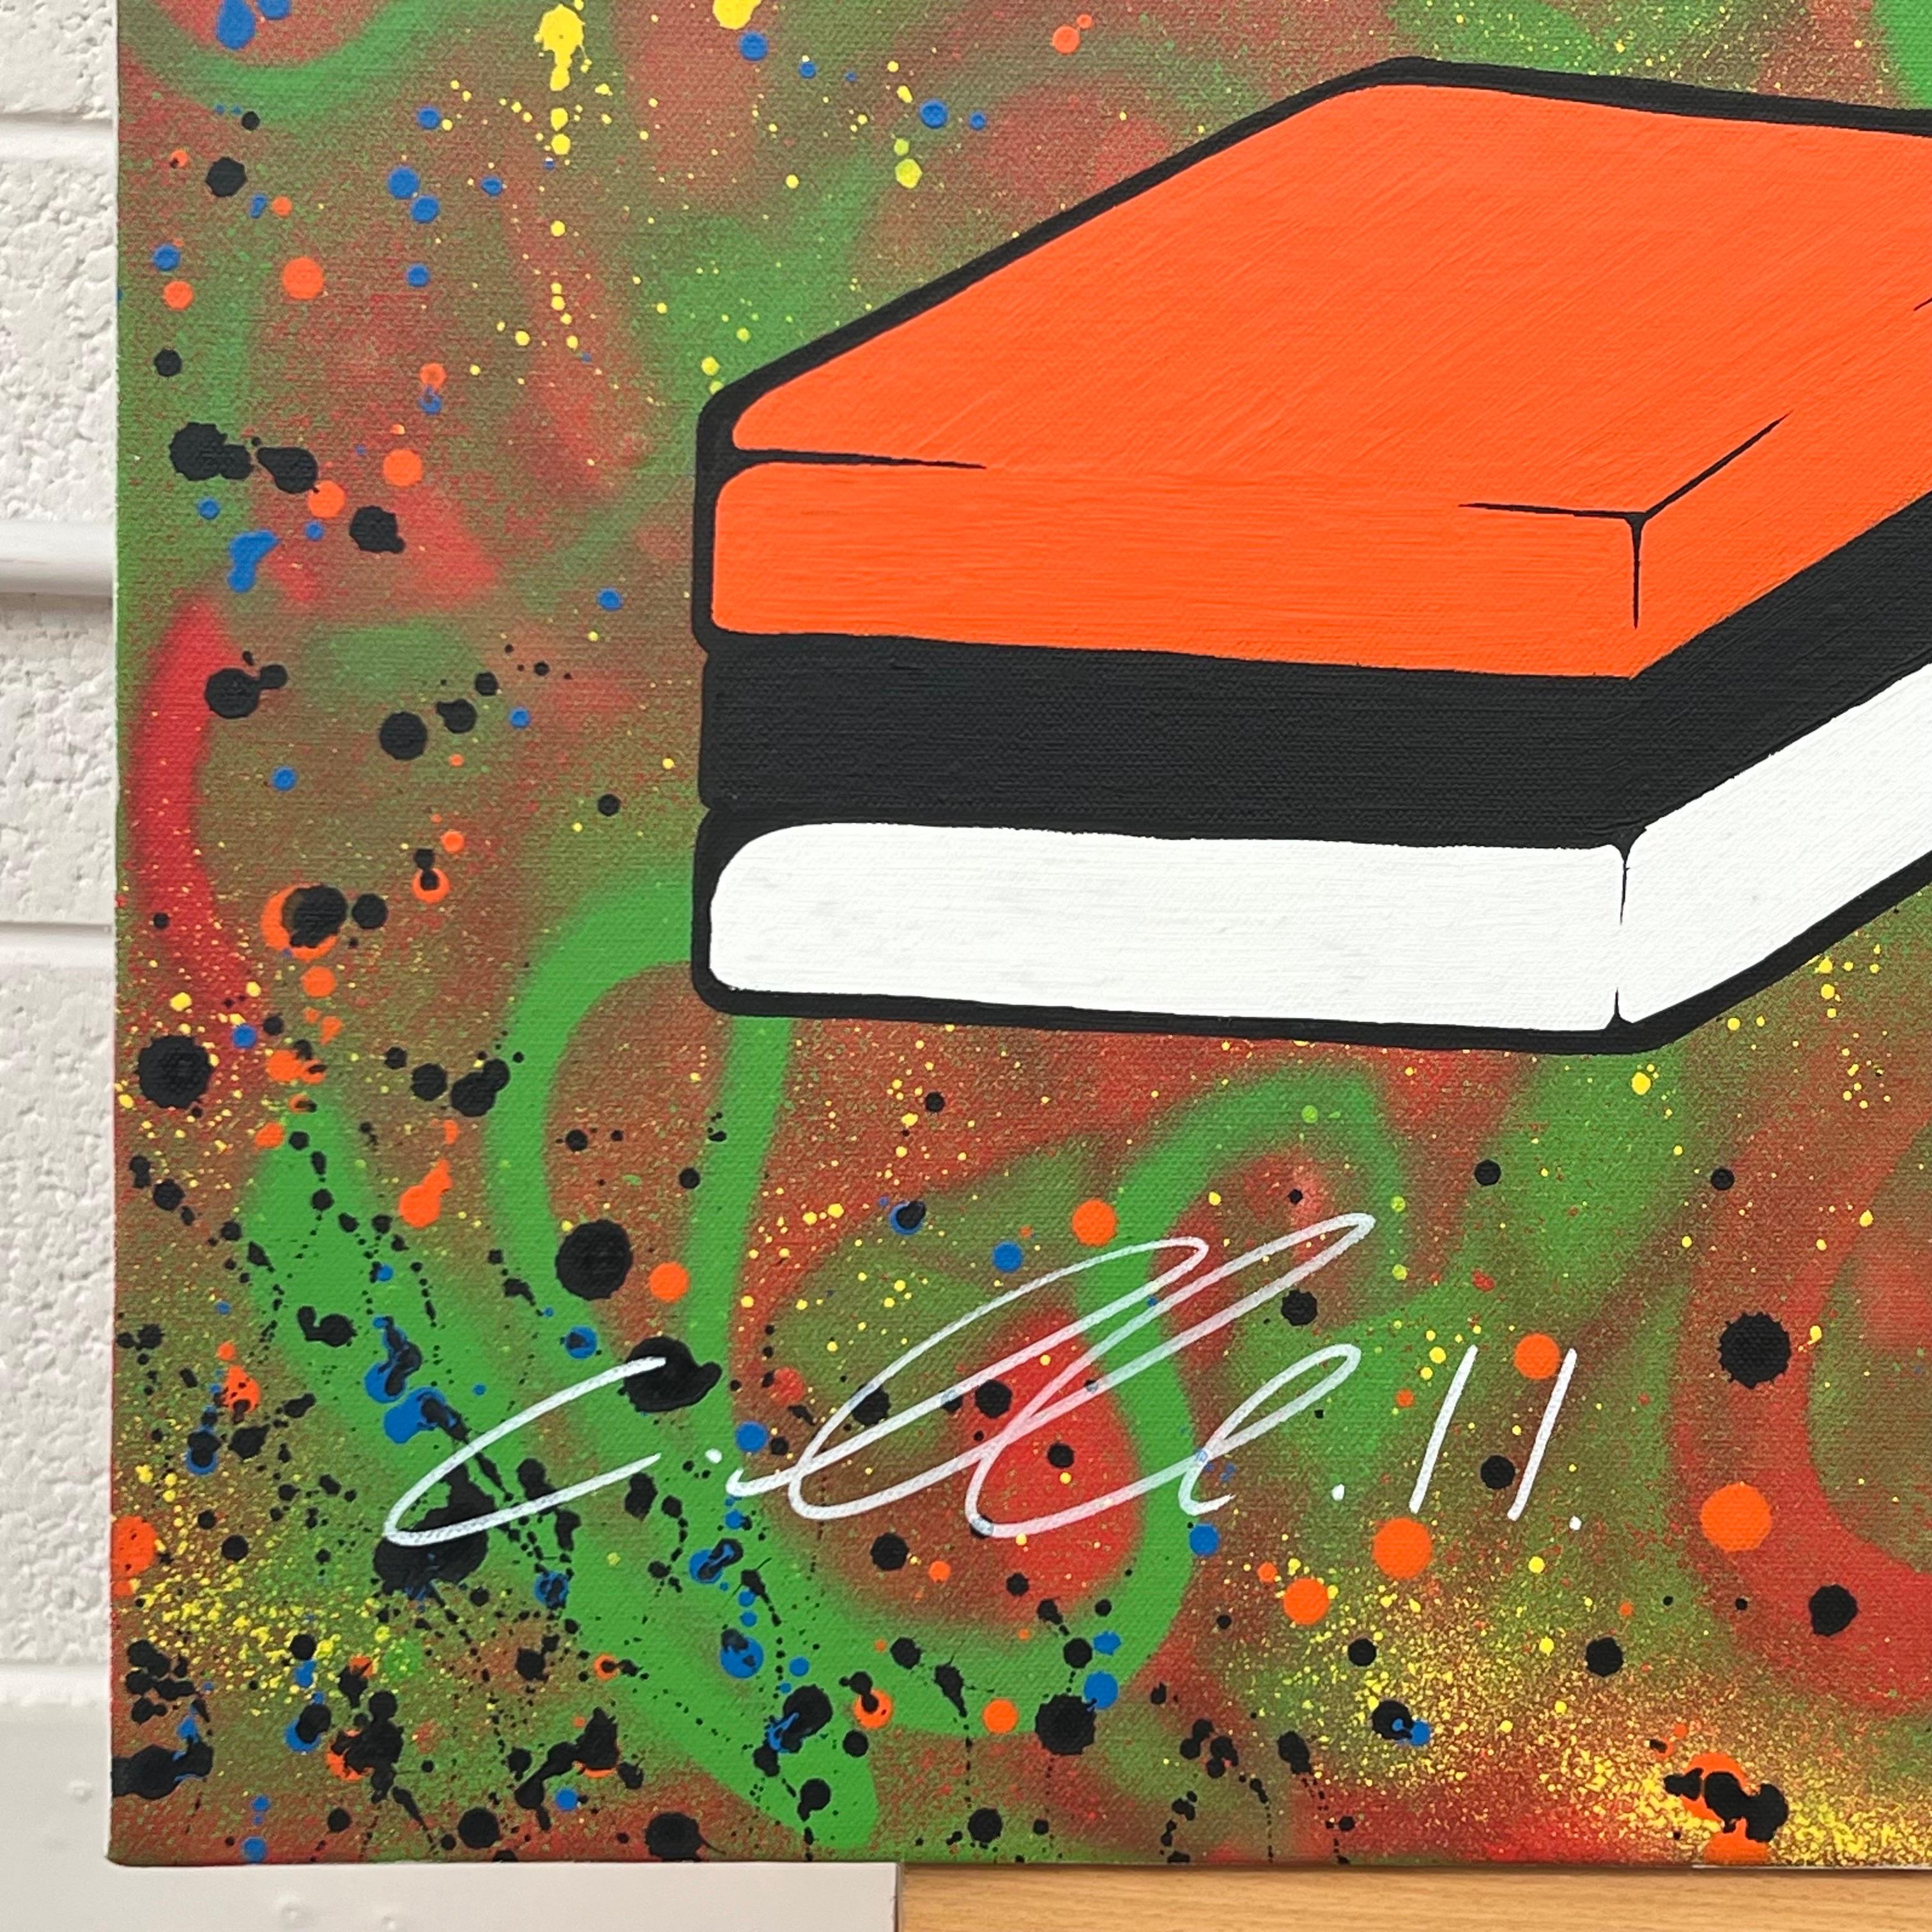 Liquorice Sweets Pop Art on Abstract Background by British Graffiti Artist - Painting by Chris Pegg